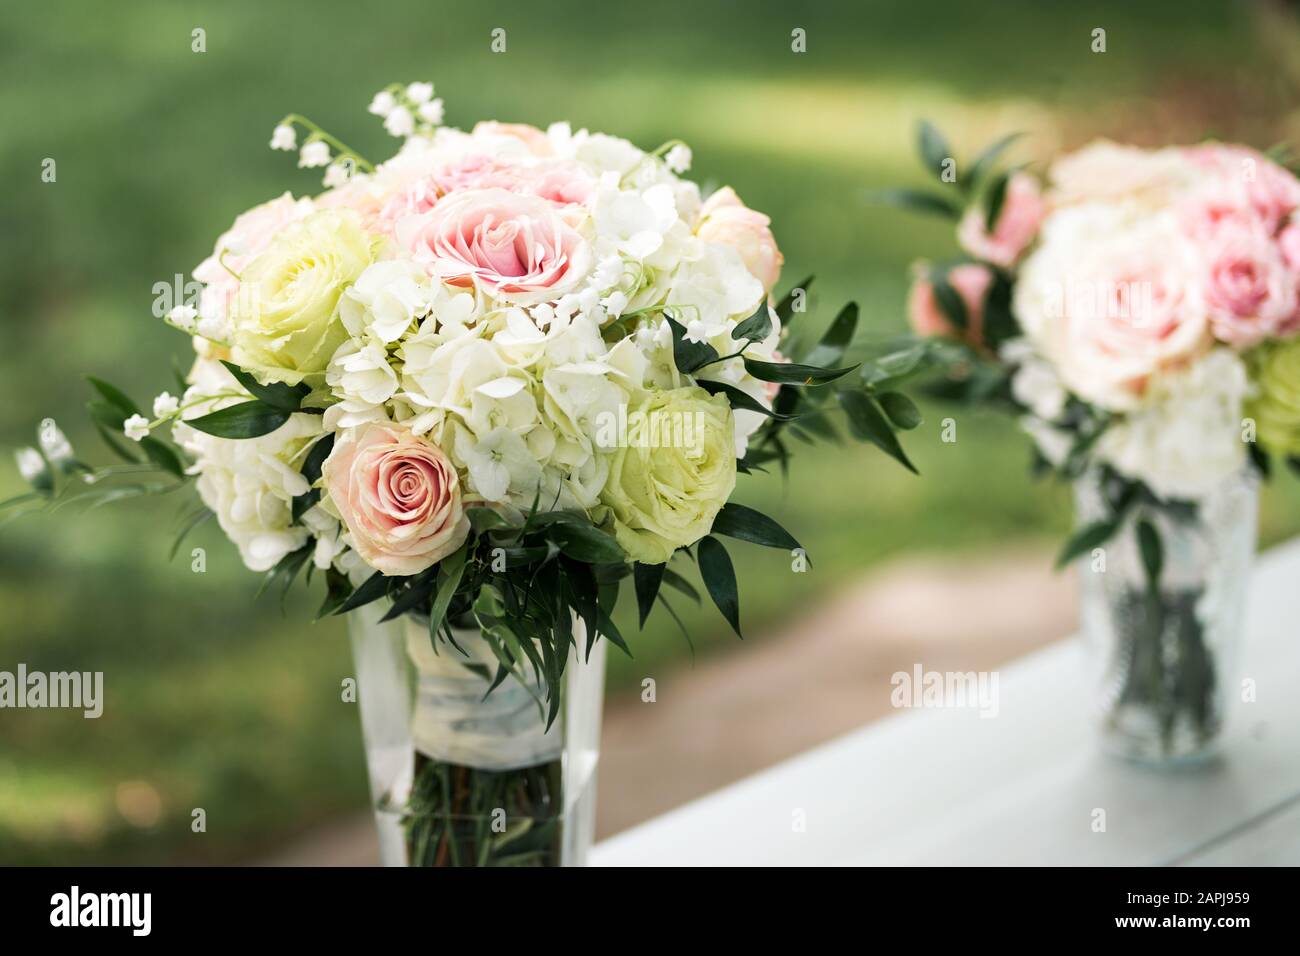 Floral bouquet of white, green and pink in vase before wedding ceremony Stock Photo